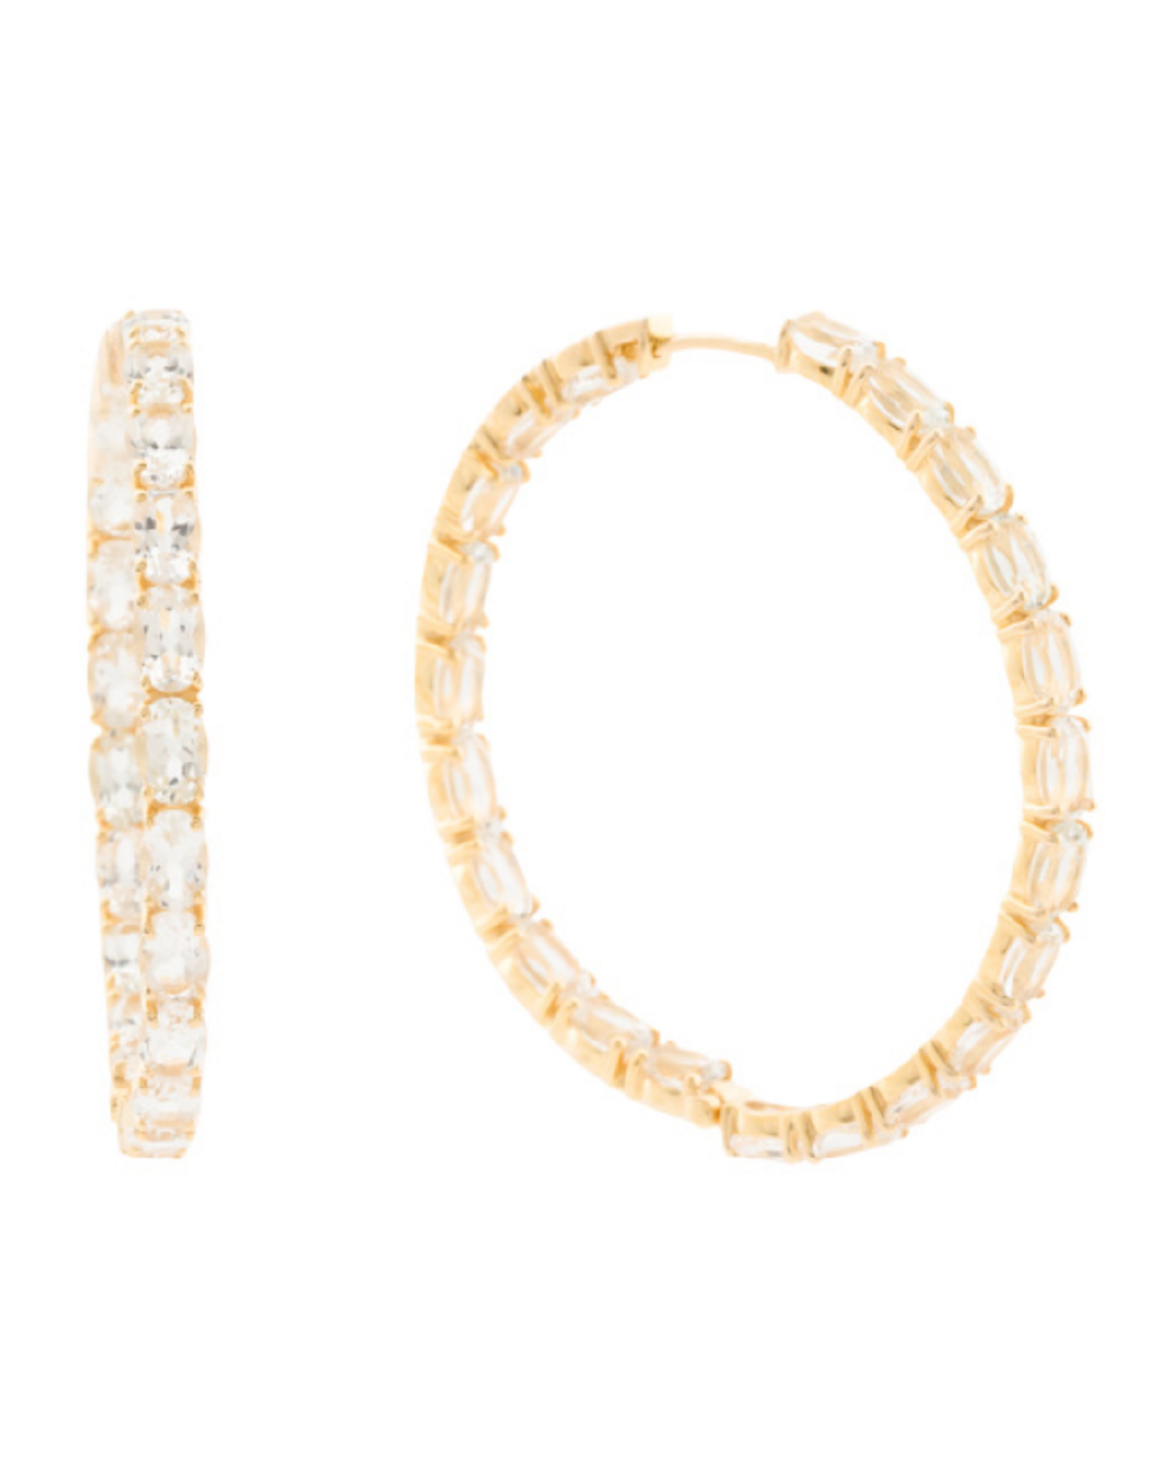 Made-In-India-14kt-Gold-Plated-White-Topaz-Hoop-Earrings, Useful Mother's Day Gifts